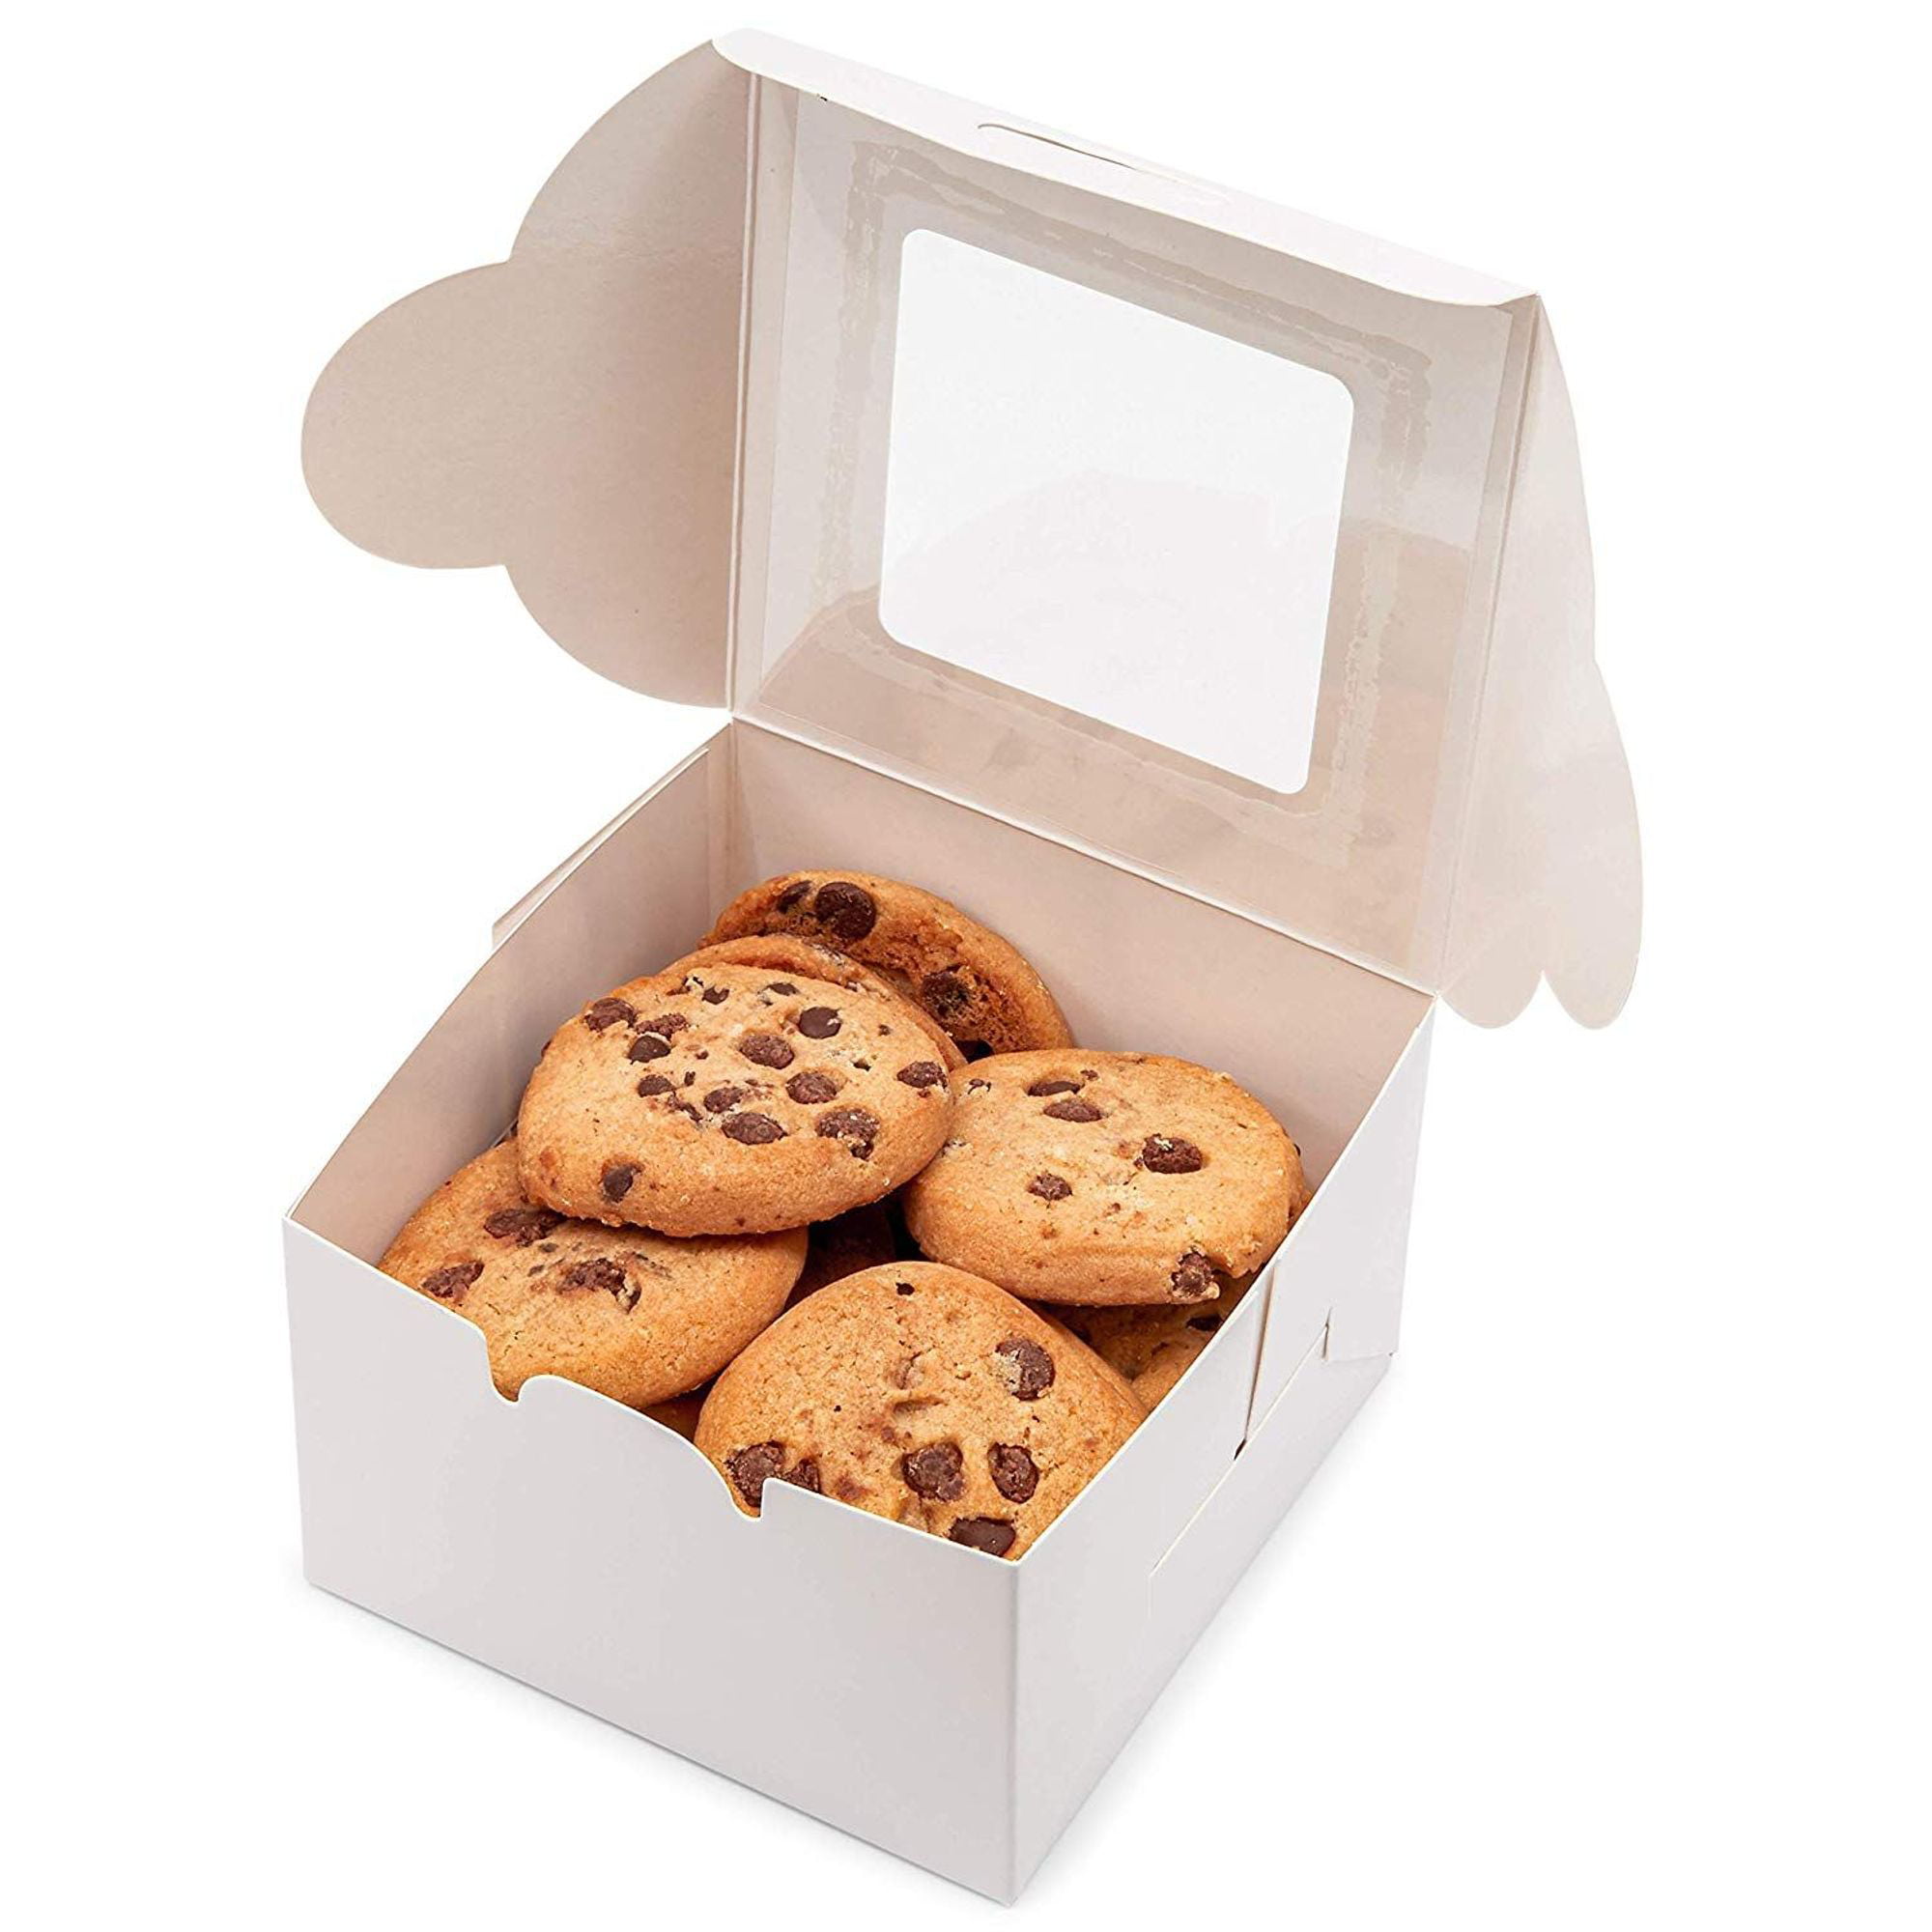 50 Packs Pastry Bakery Box with Window, Paper Gift Dessert